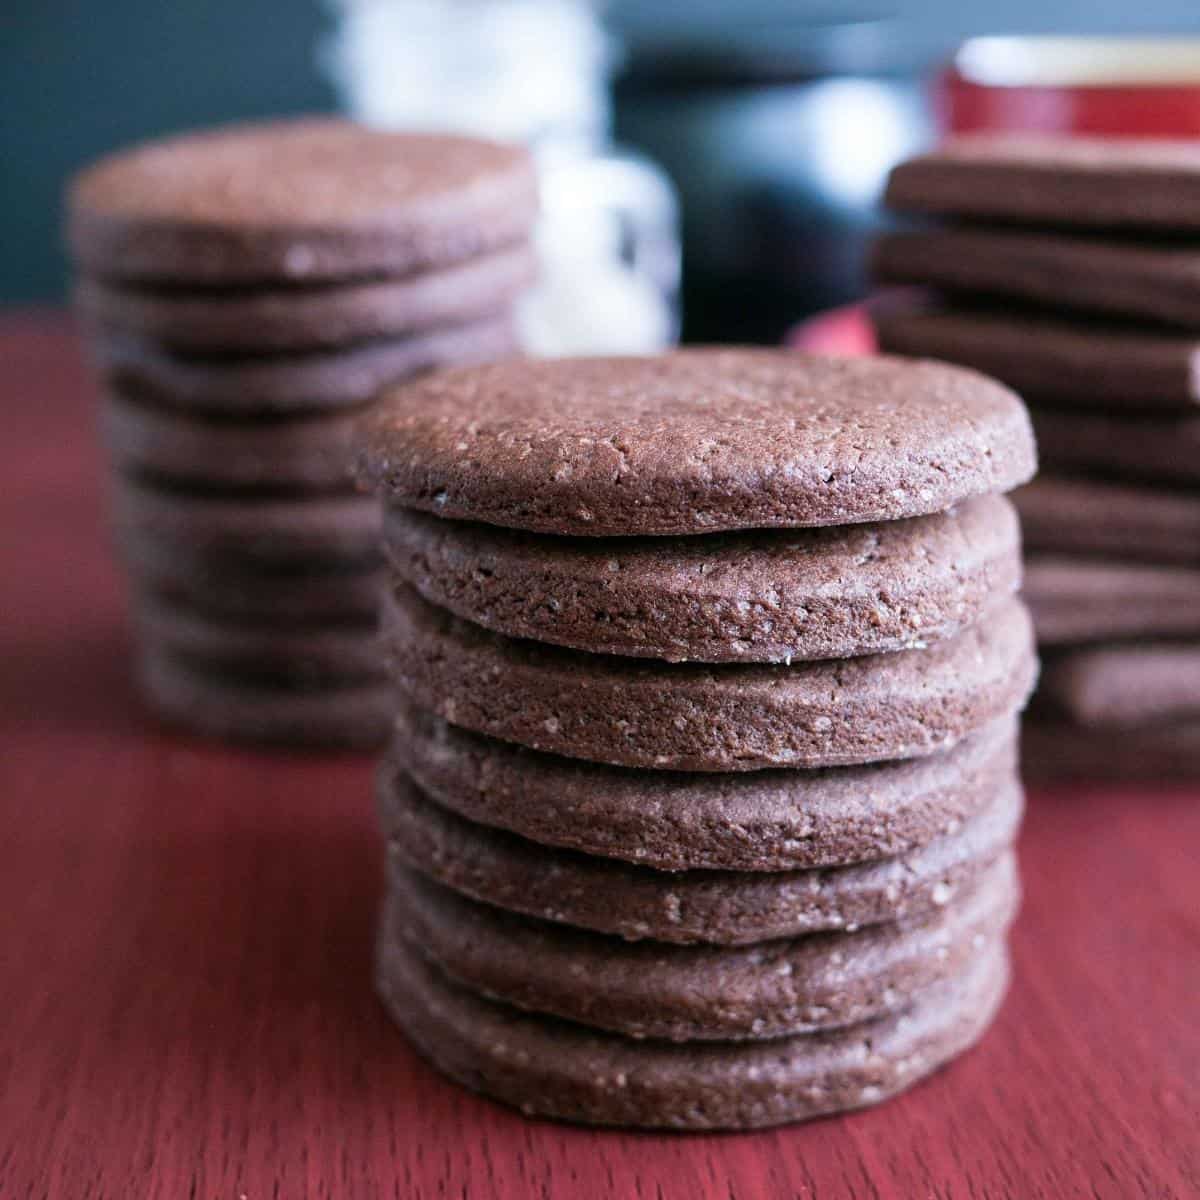 Stack of sugar cookies on the table